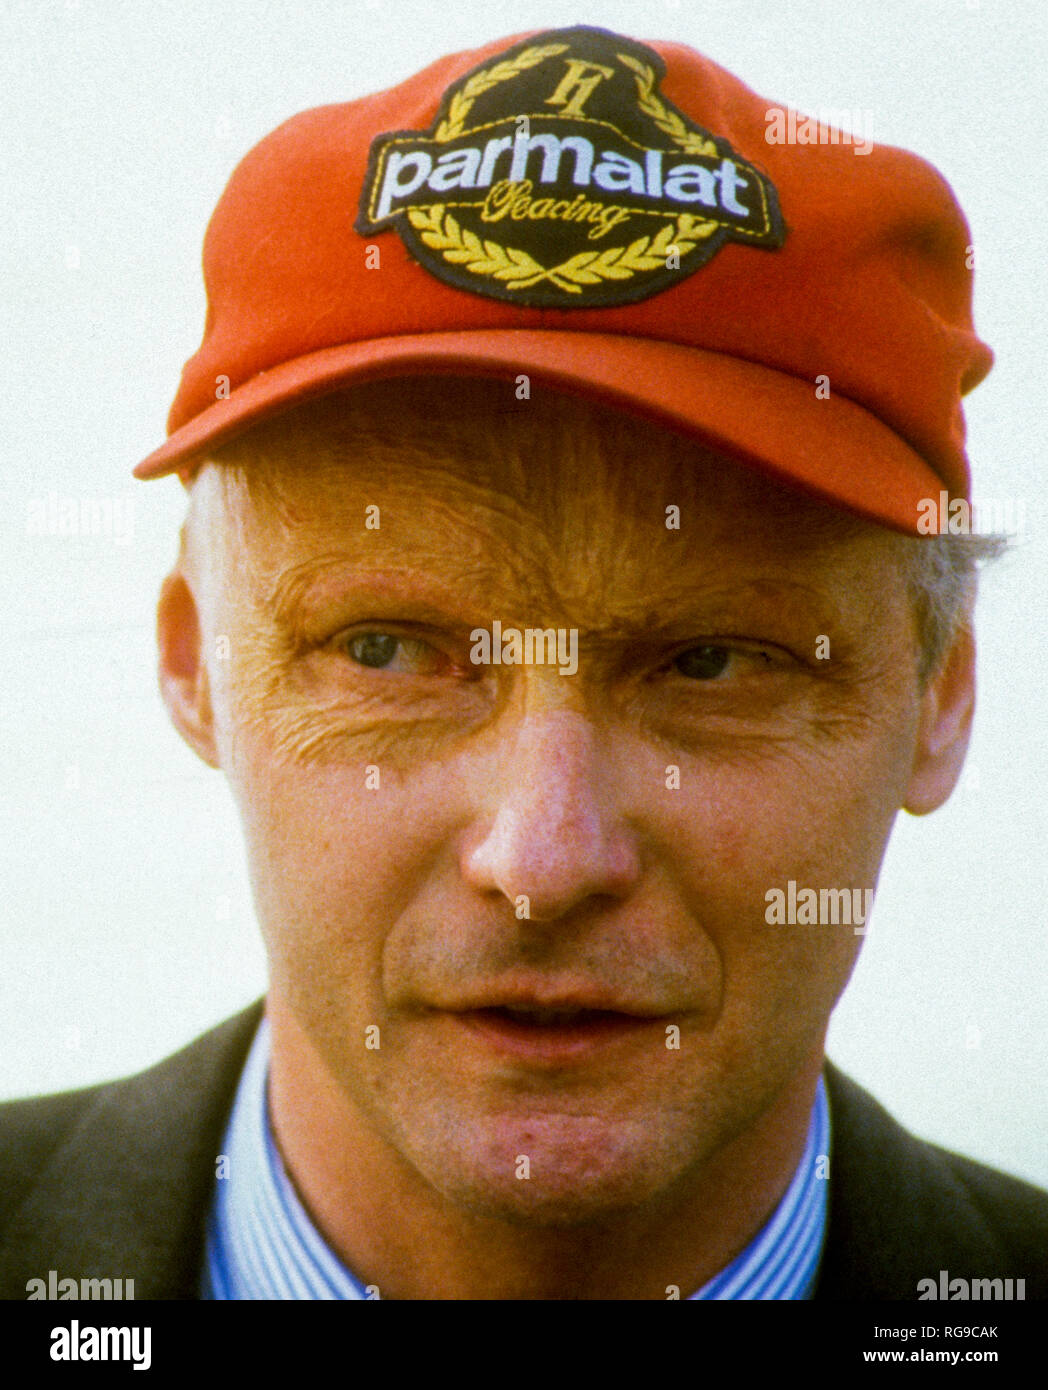 NIKI LAUDA Austrian formula one driver with a face damaged after accident  Stock Photo - Alamy